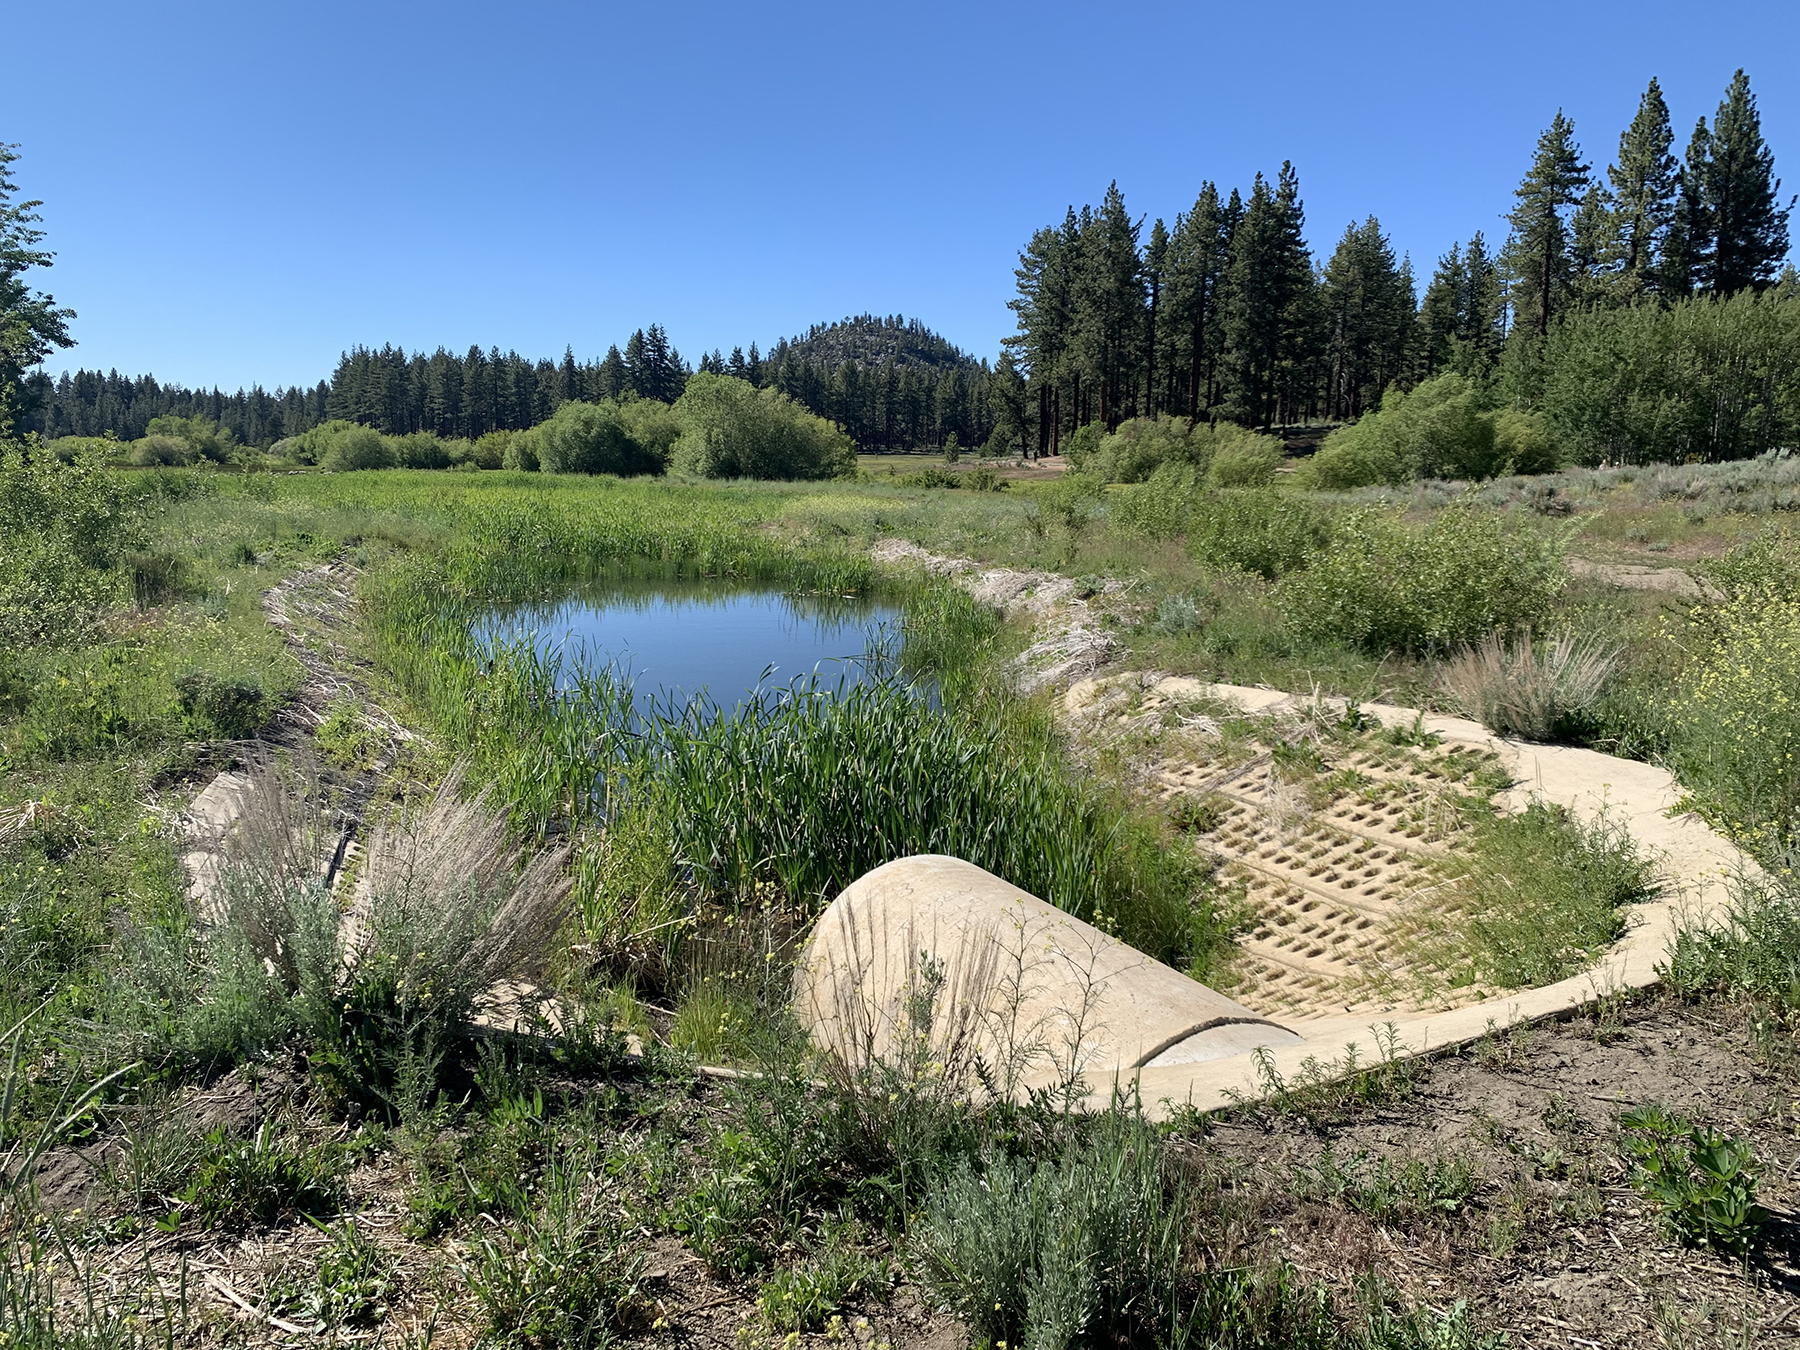 Wet detention basins also are used to capture pollutants in runoff before they enter Lake Tahoe. (Photograph courtesy of Nevada Division of Environmental Protection)